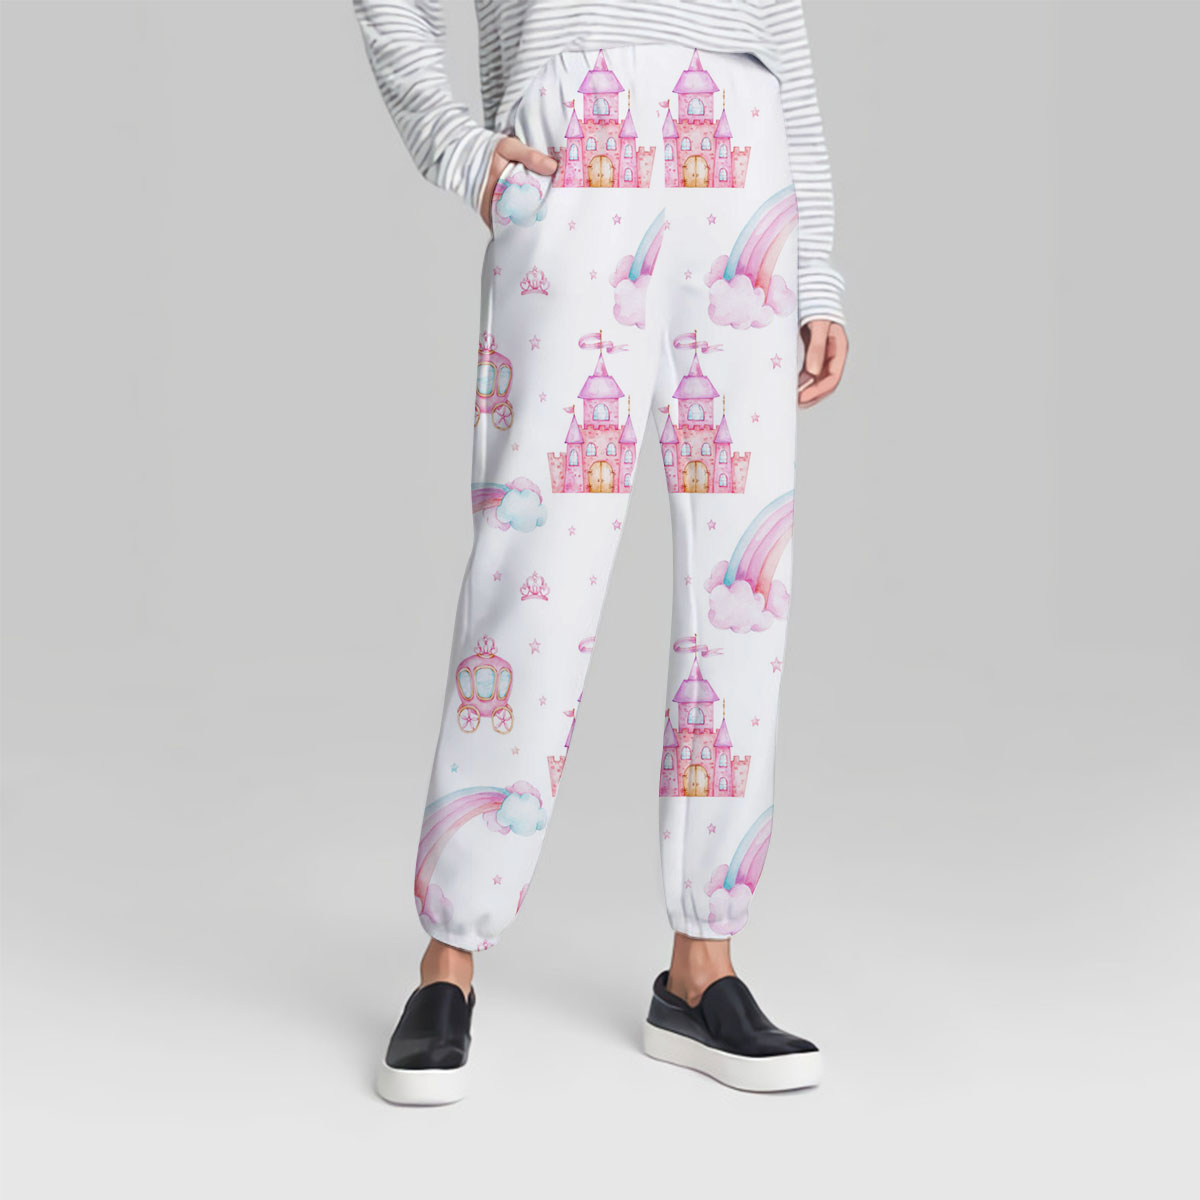 Seamless Pattern With Rainbow, Carriage And Castle Sweatpant